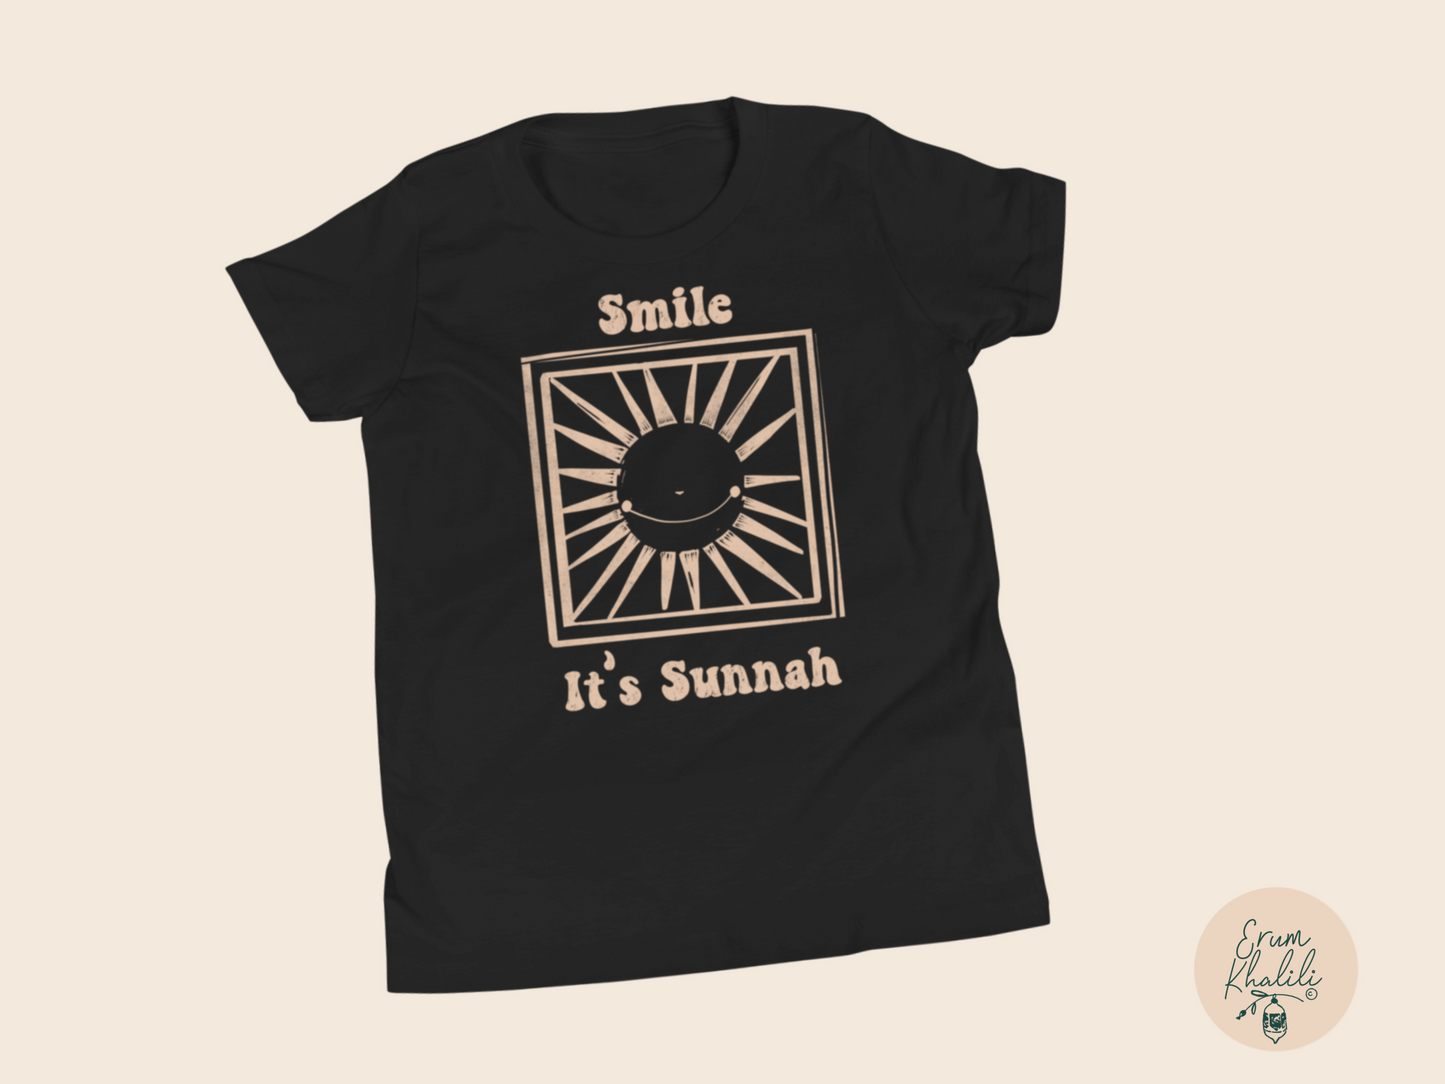 Youth & Toddler Short Sleeve Tee Smile it’s Sunnah black and blue